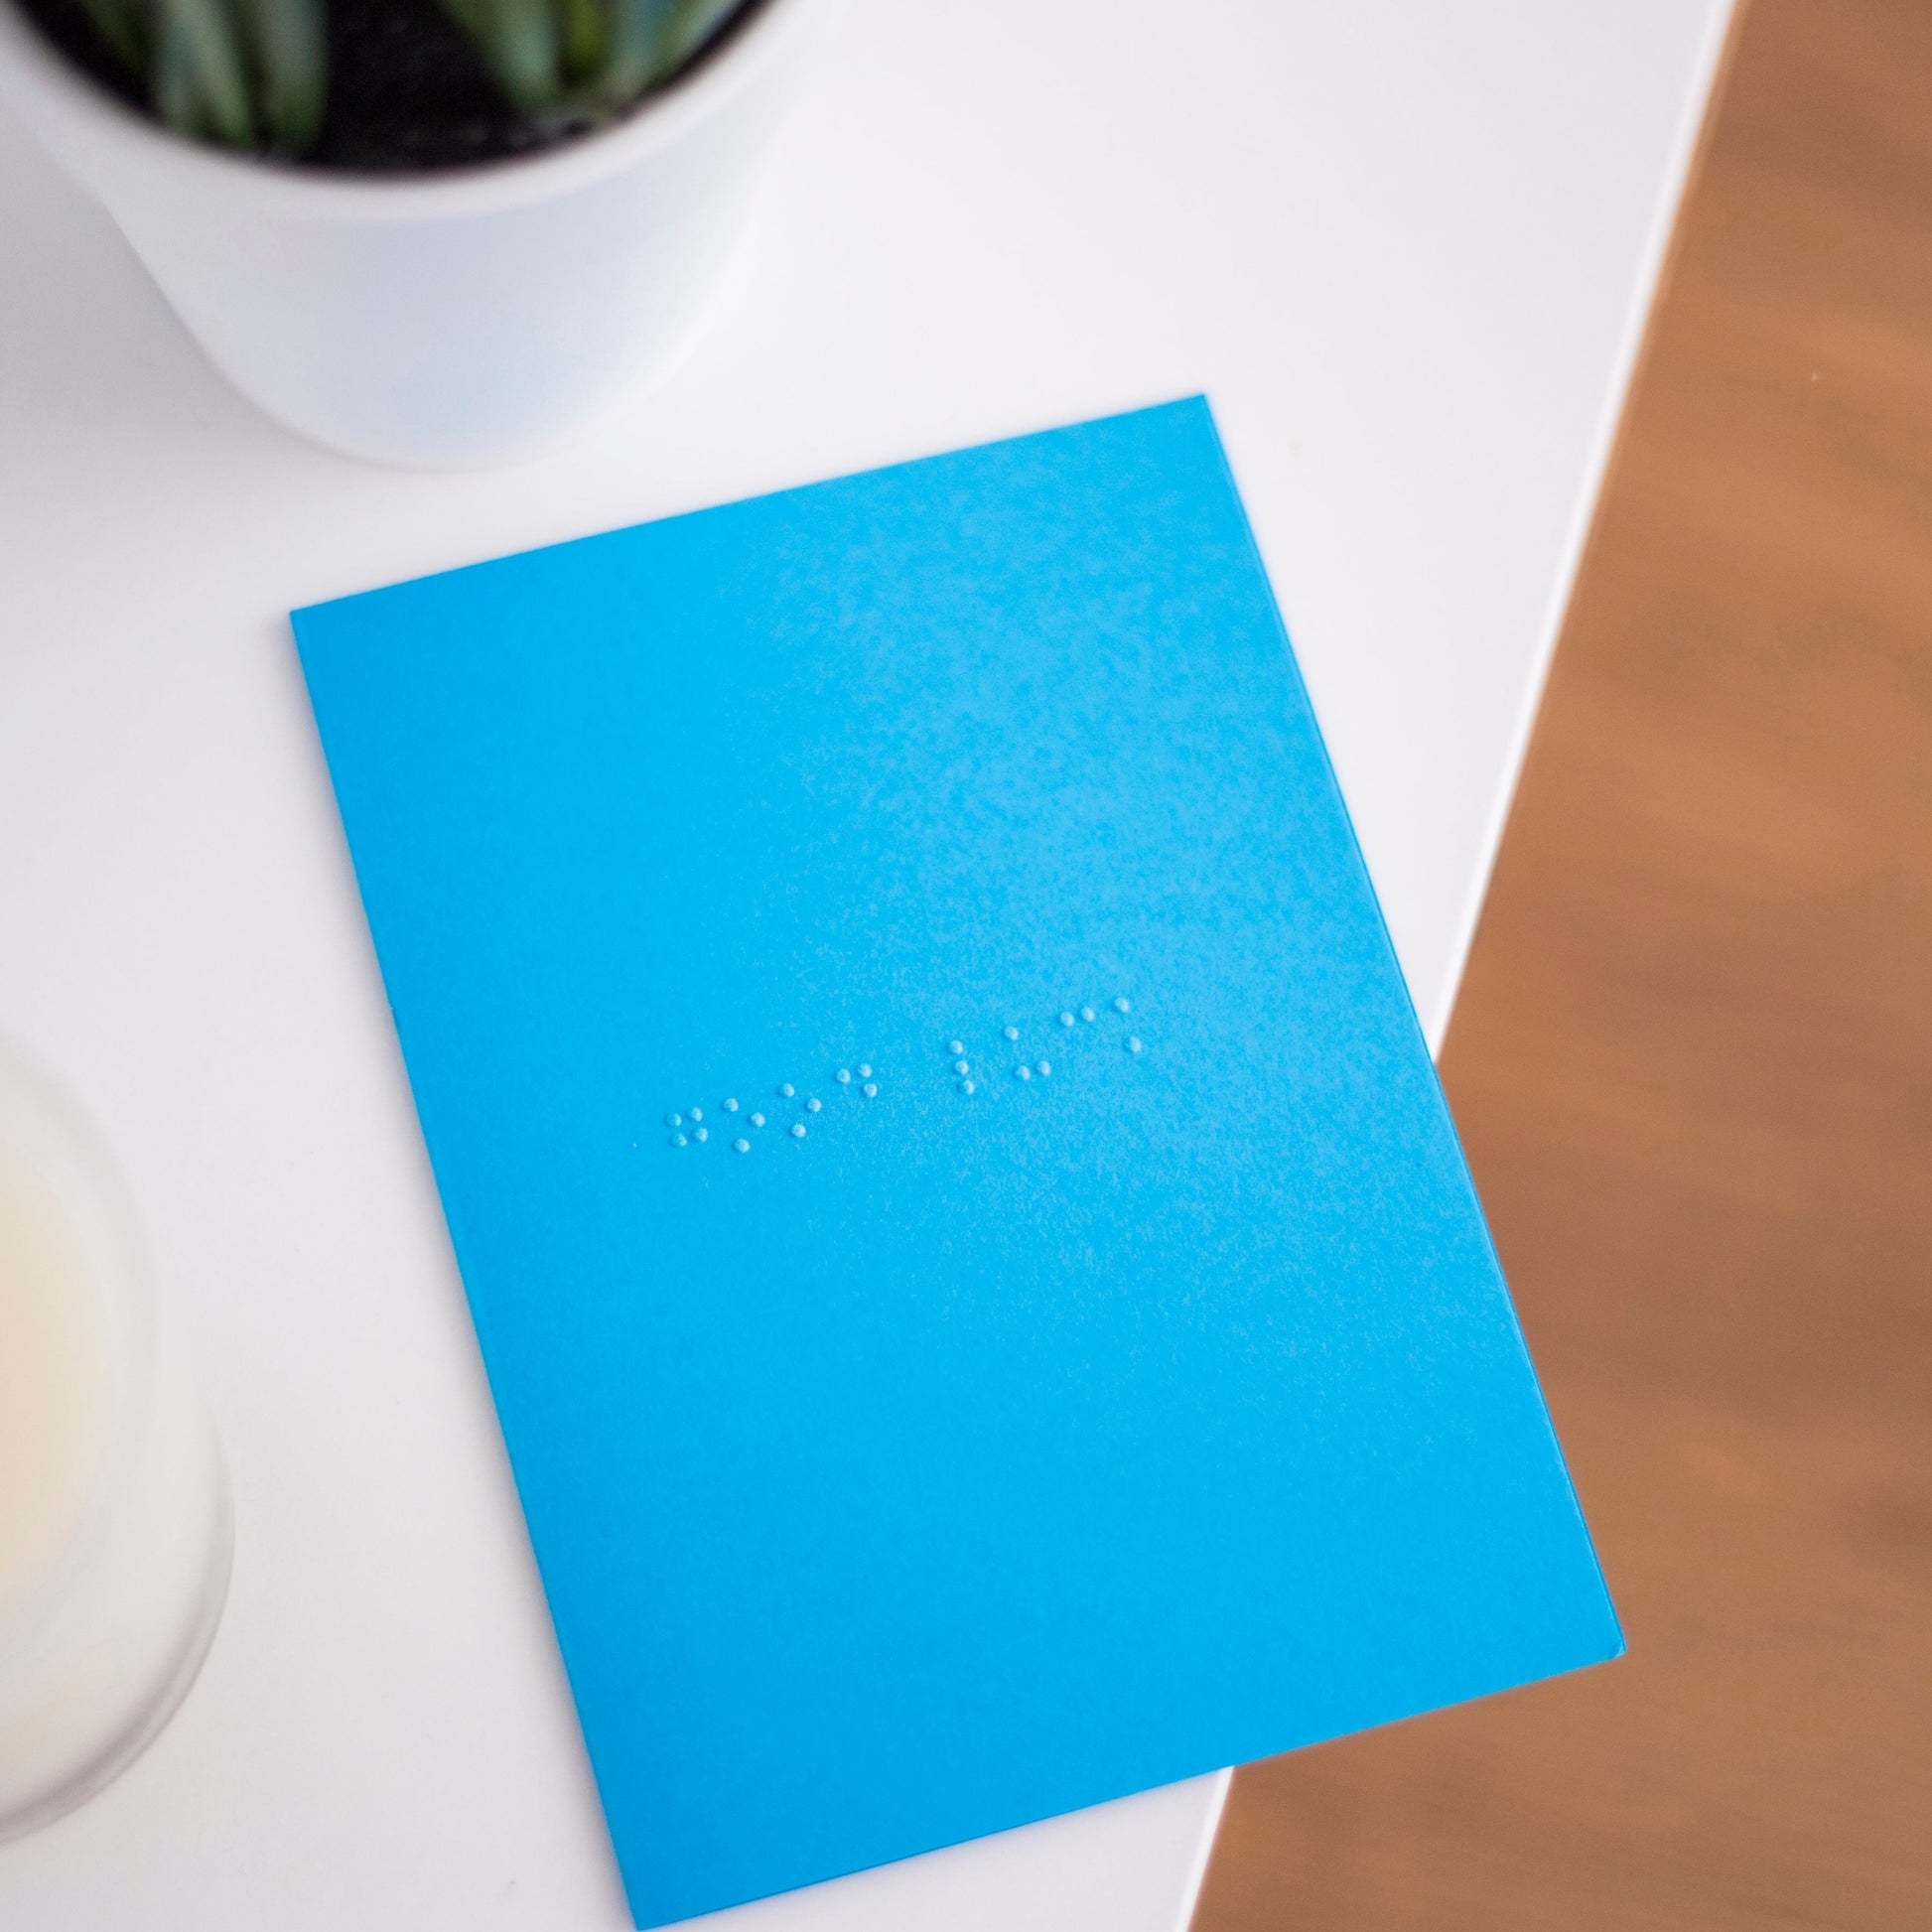 A vibrant blue card lay flat on a table with good luck written in lower case grade one braille. There is a candle in the bottom left and a blurry plant in the top left.